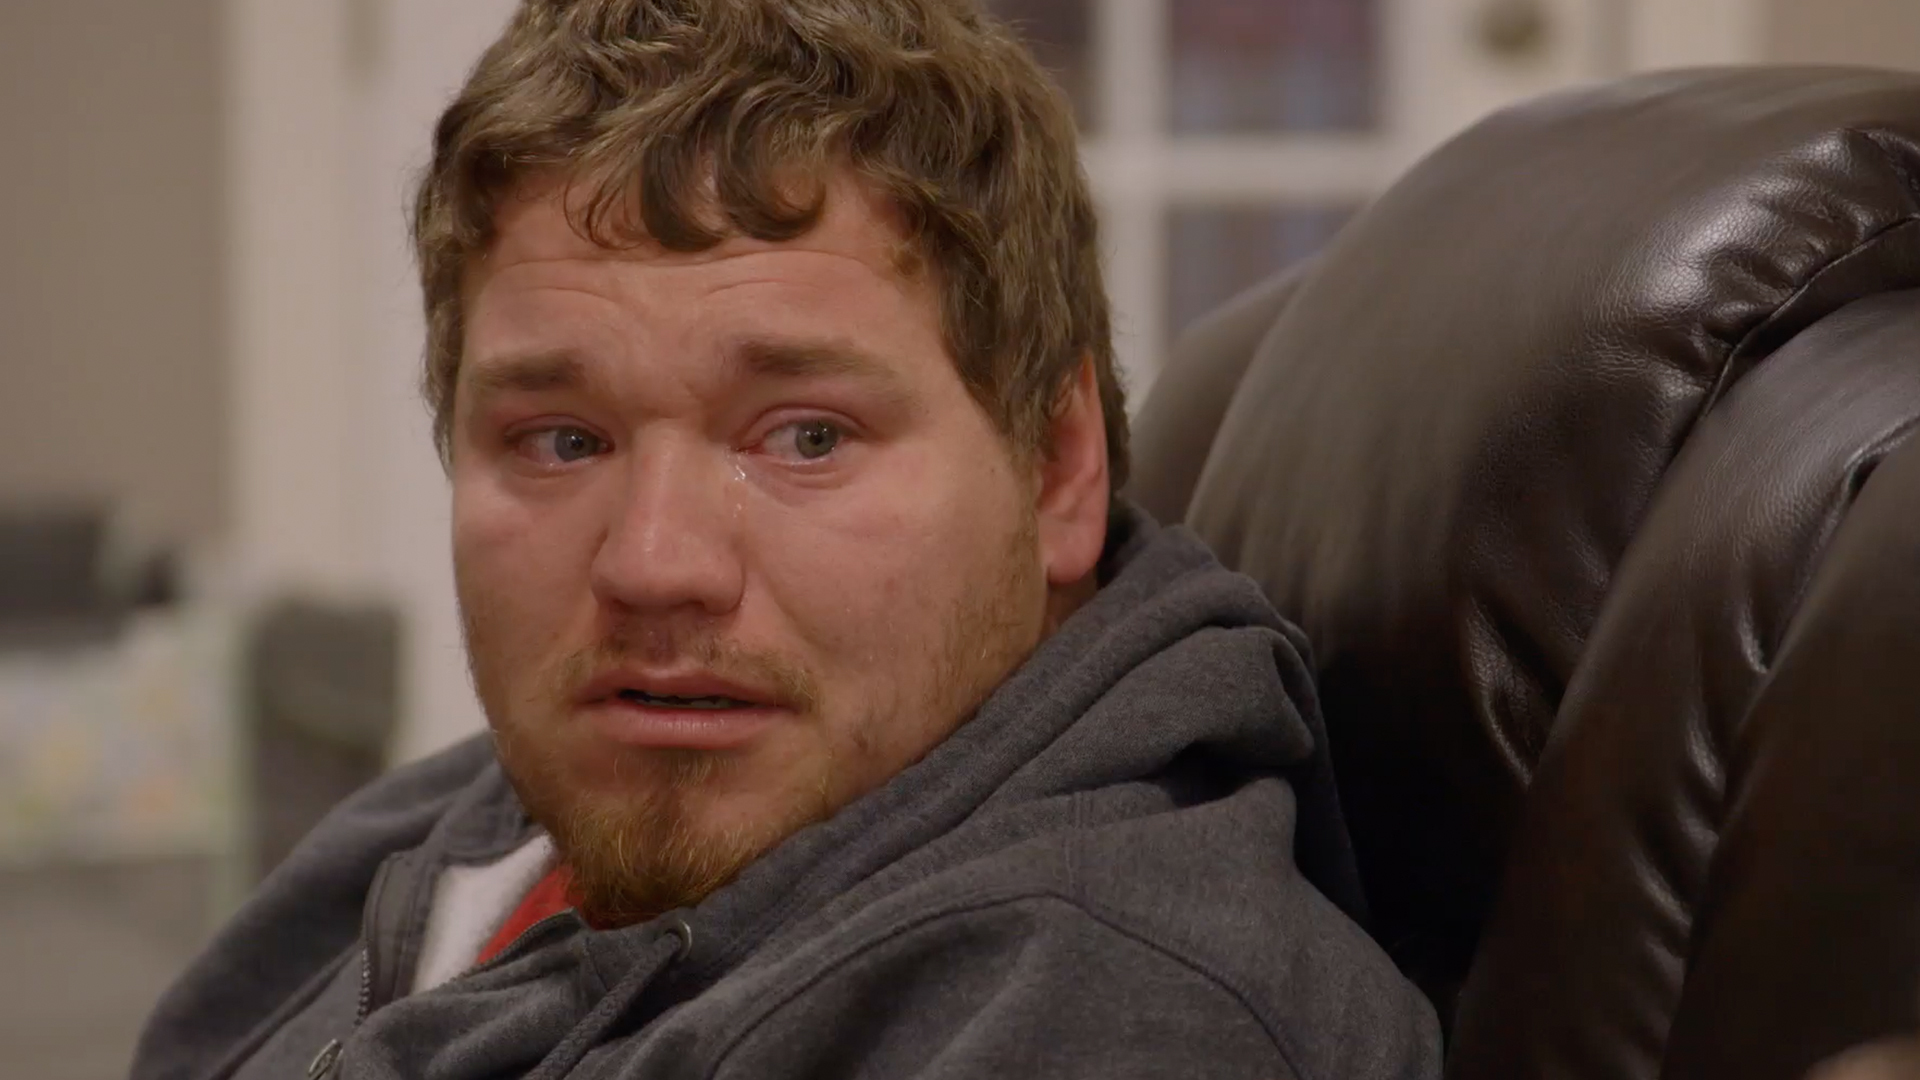 Watch Sneak Peek: A Family Therapy Session | Mama June: From Not to Hot Video Extras